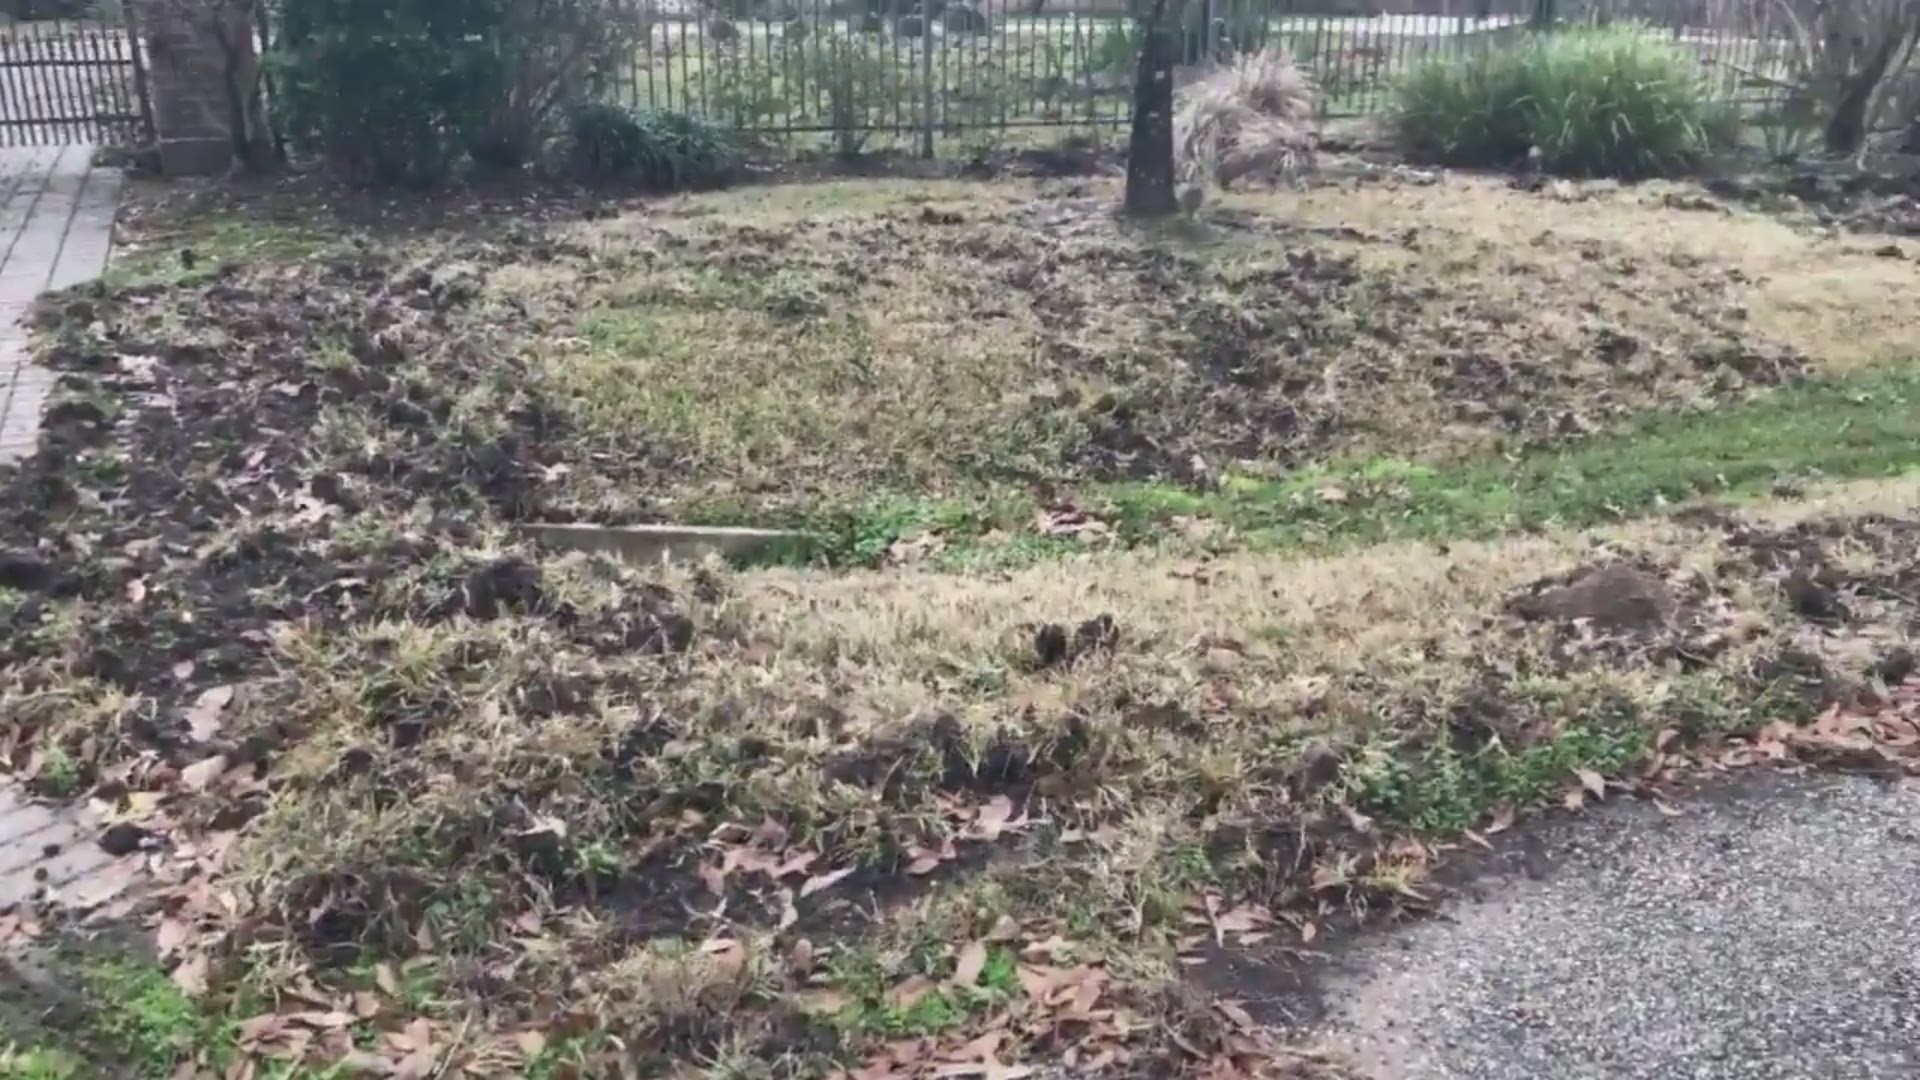 'They're aggressive. They're a nuisance," and residents of The Woodlands are ready for the township to take stiffer action to remove feral hogs from neighborhoods.